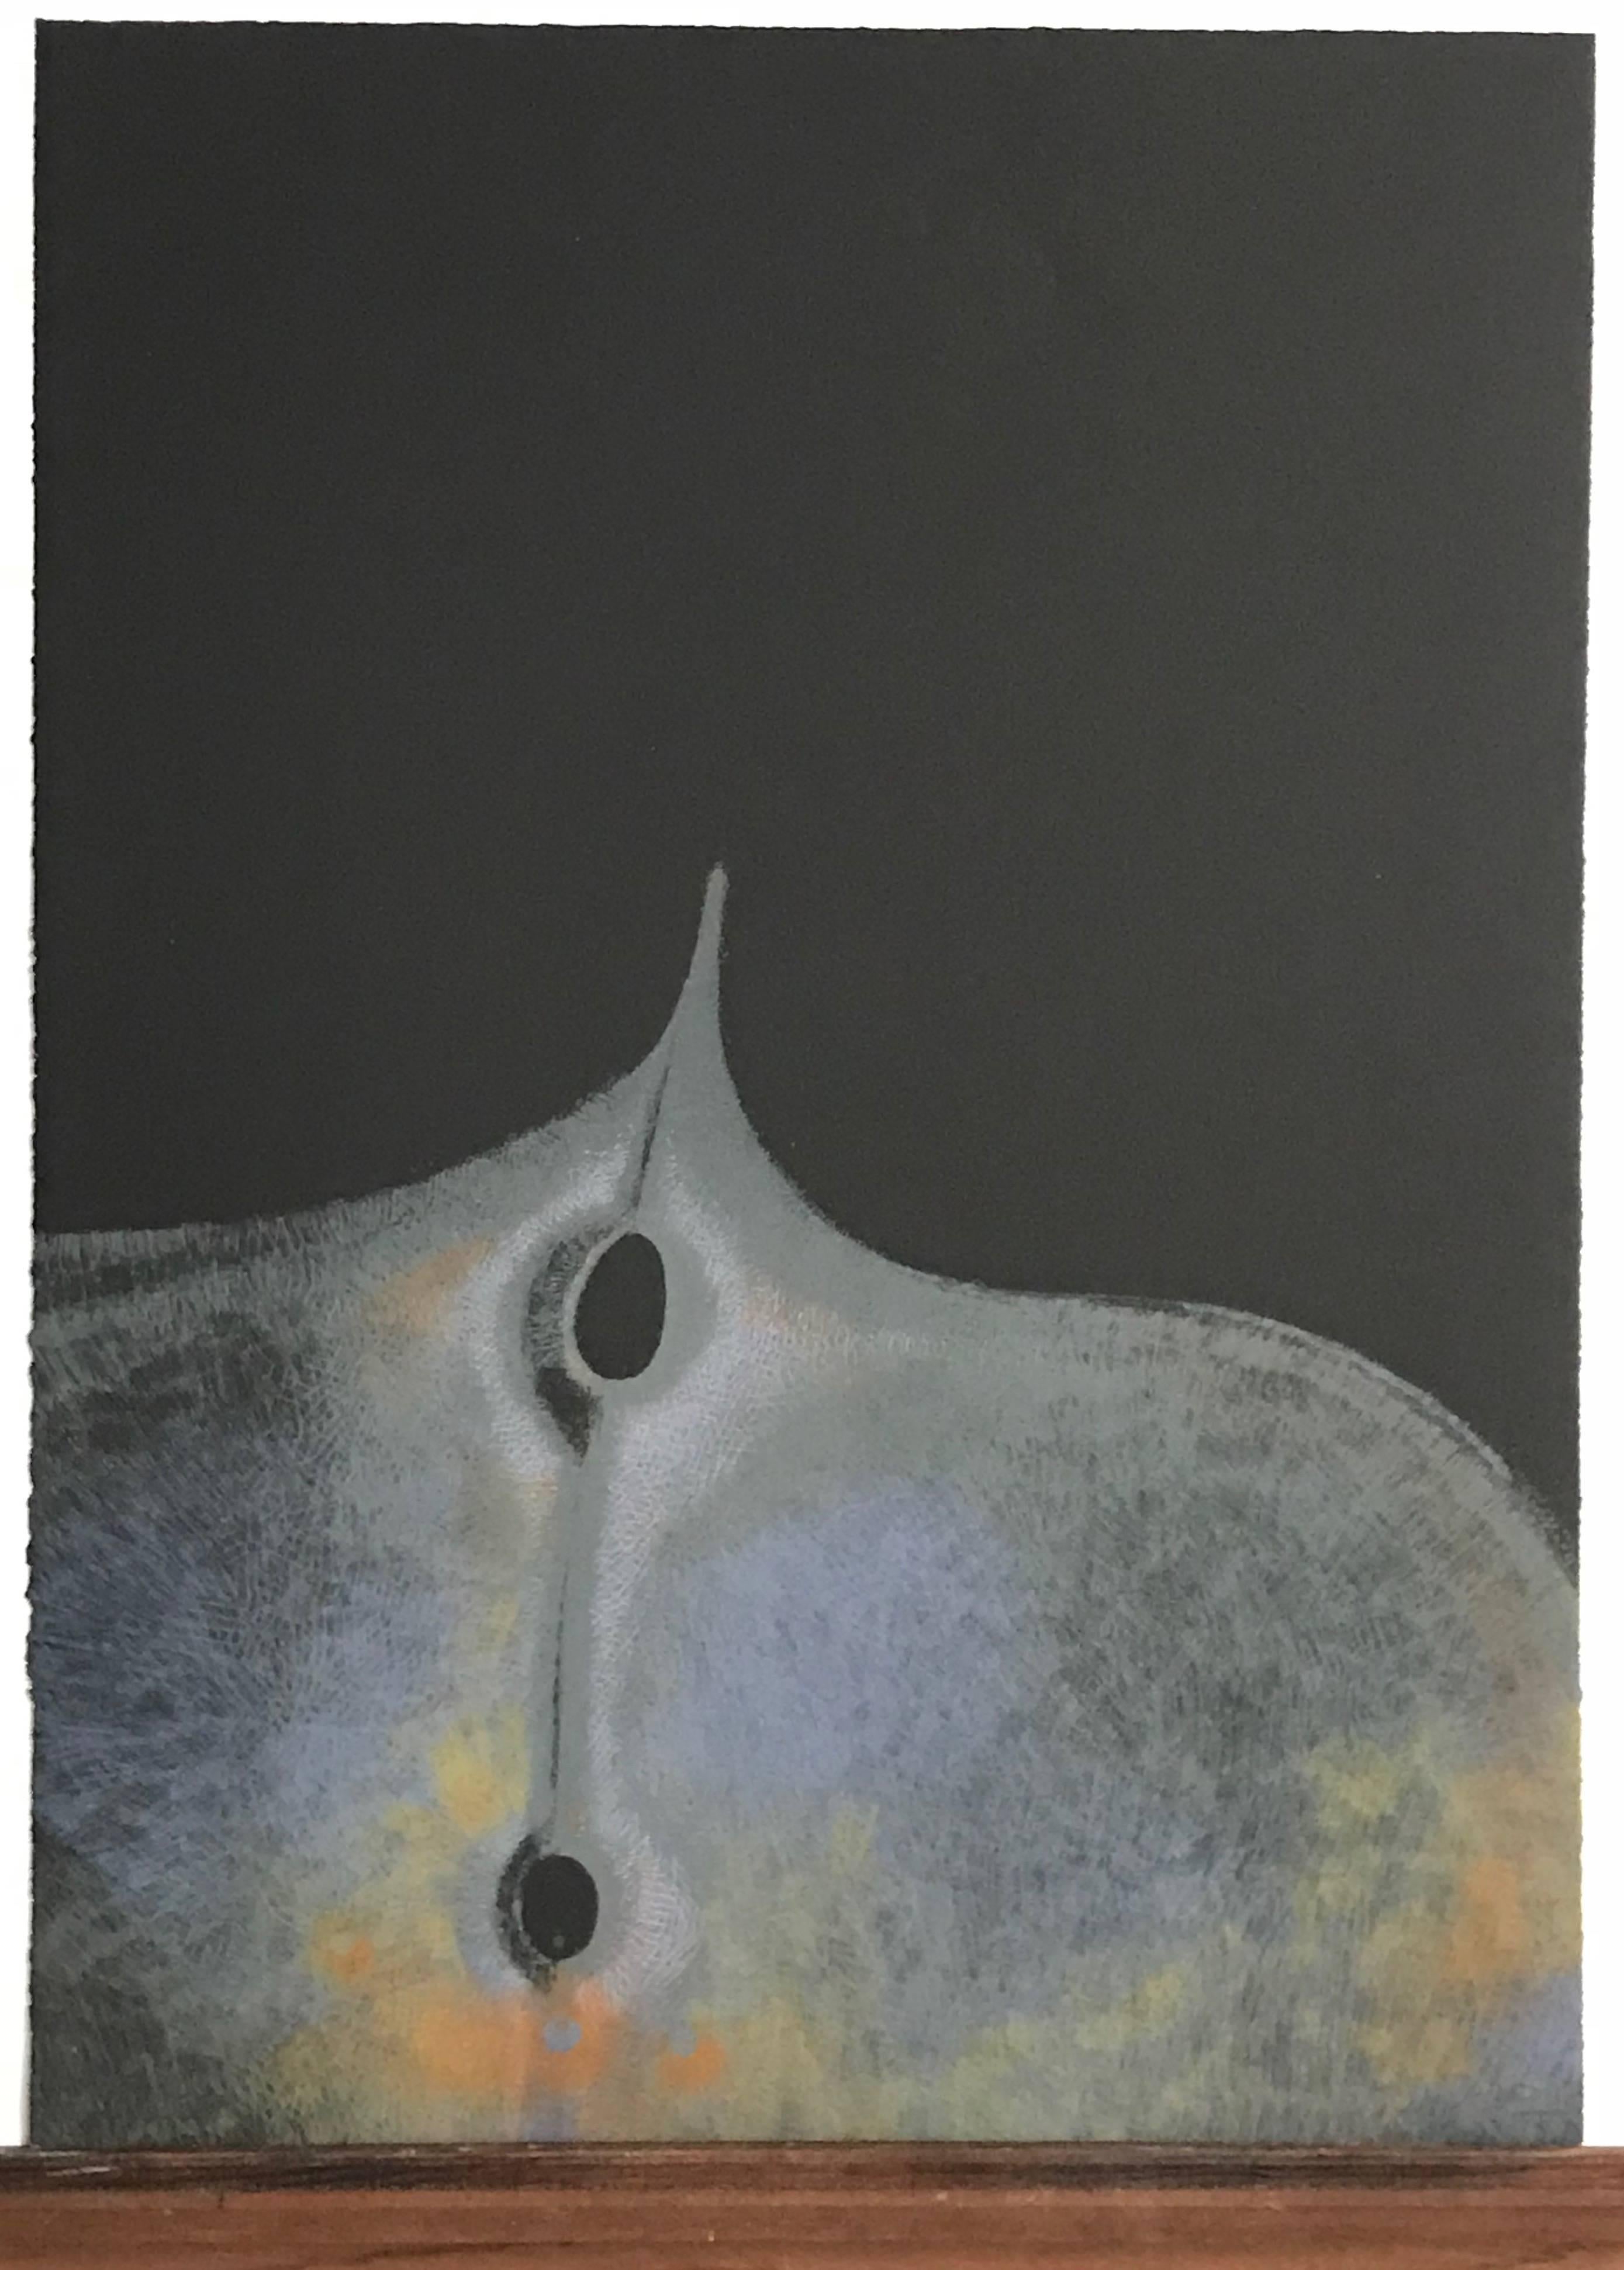 BIOMORPHIC ABSTRACT Signed Lithograph, Opaque Colors on Black, South Asian Art - Print by Arun Bose